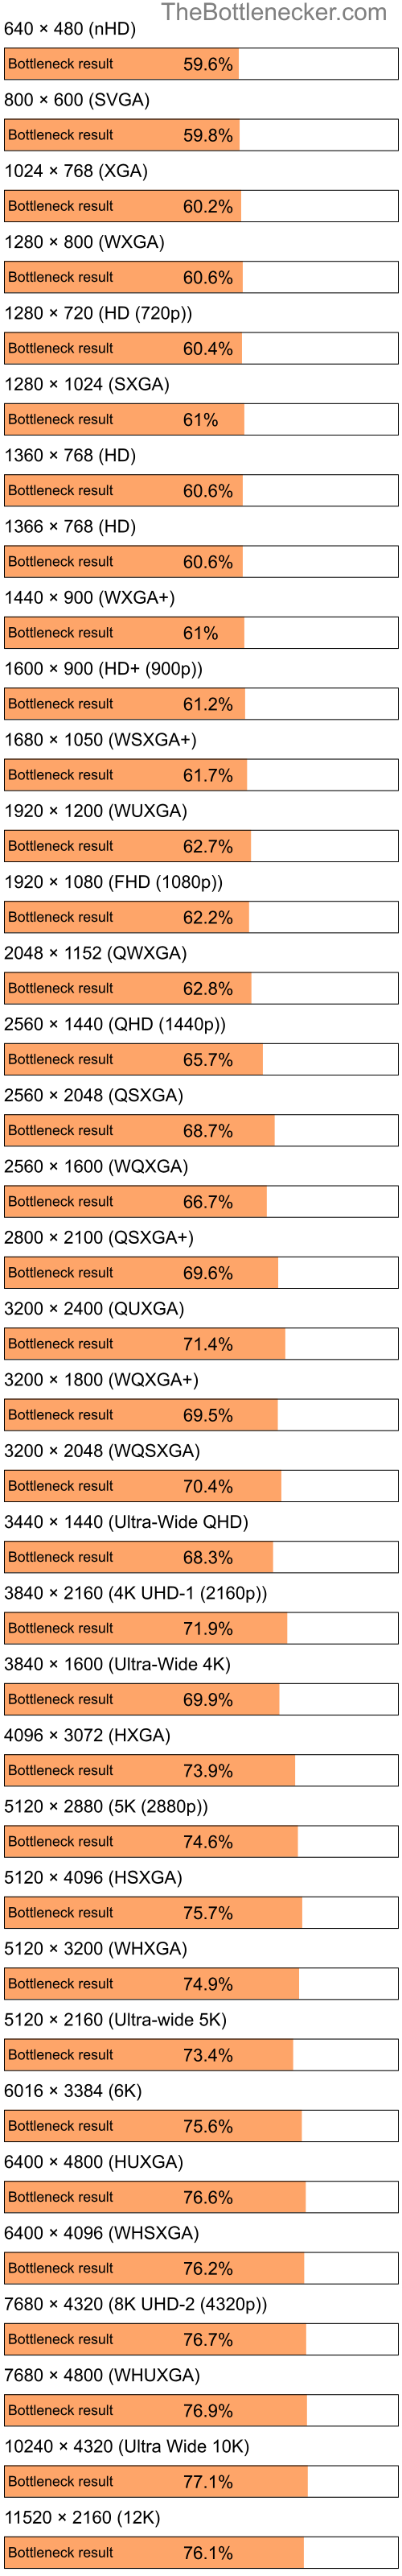 Bottleneck results by resolution for Intel Pentium 4 and AMD Mobility Radeon HD 3470 in General Tasks